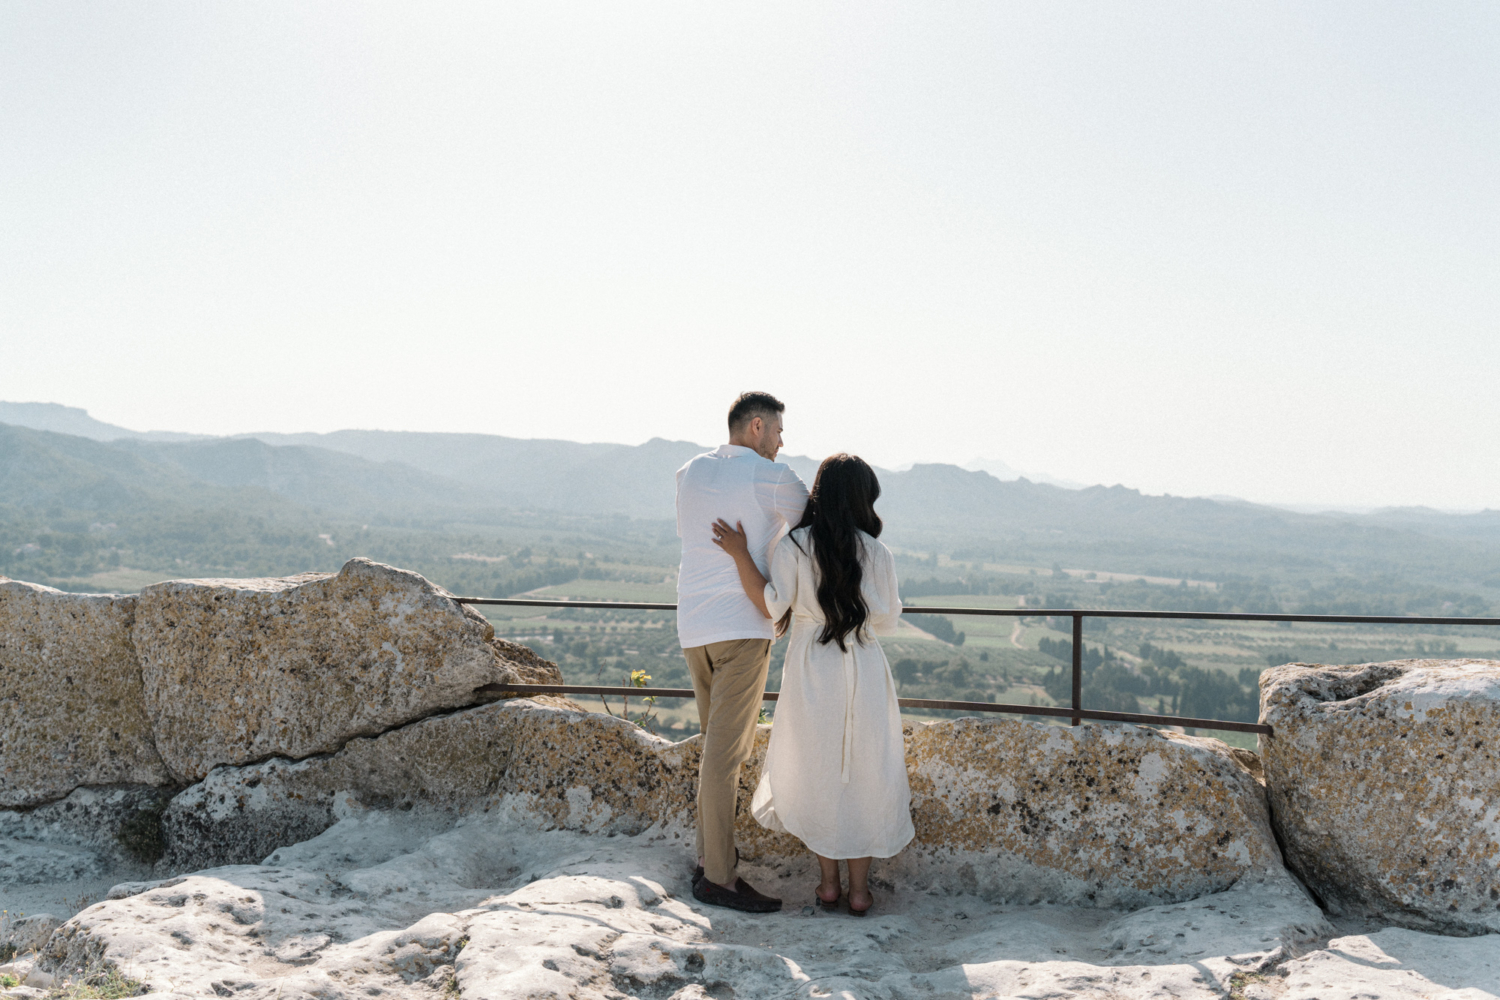 man and woman look at scenery in les baux de provence